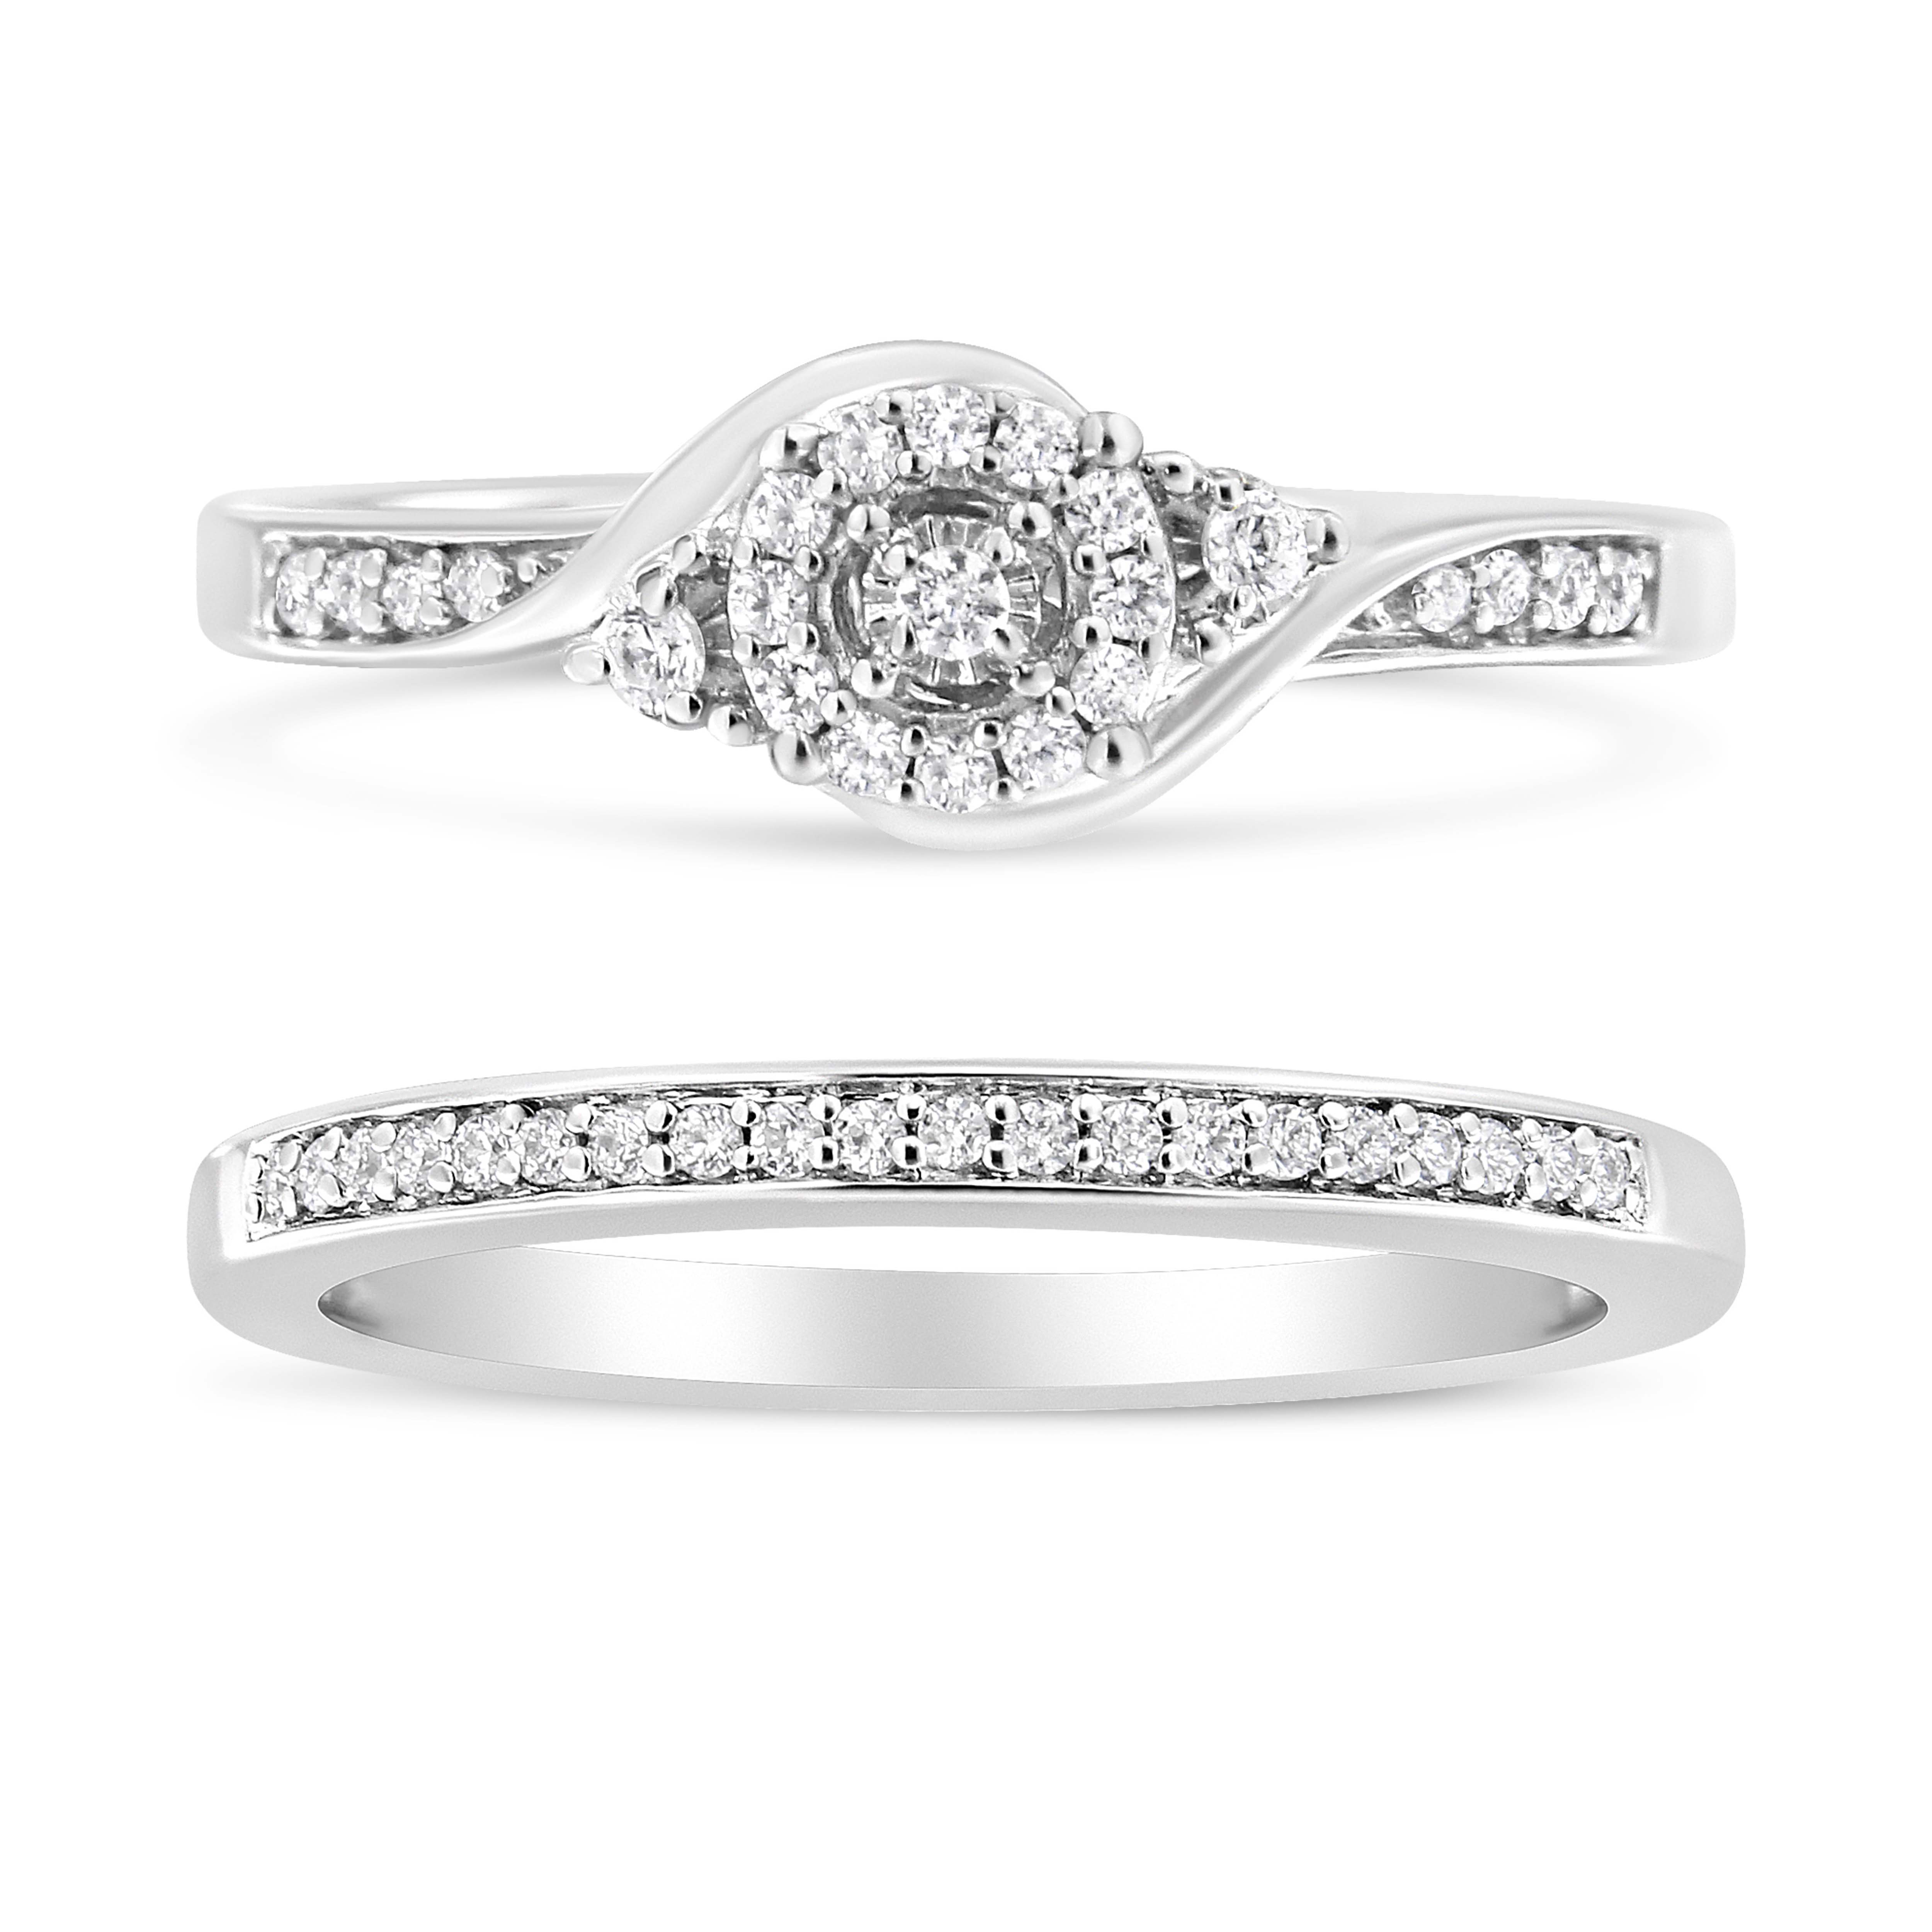 .925 Sterling Silver 1/4 Cttw Diamond Halo and Swirl Engagement Ring and Wedding Band Set (I-J Color, I3 Clarity)- Ring Size 6-2